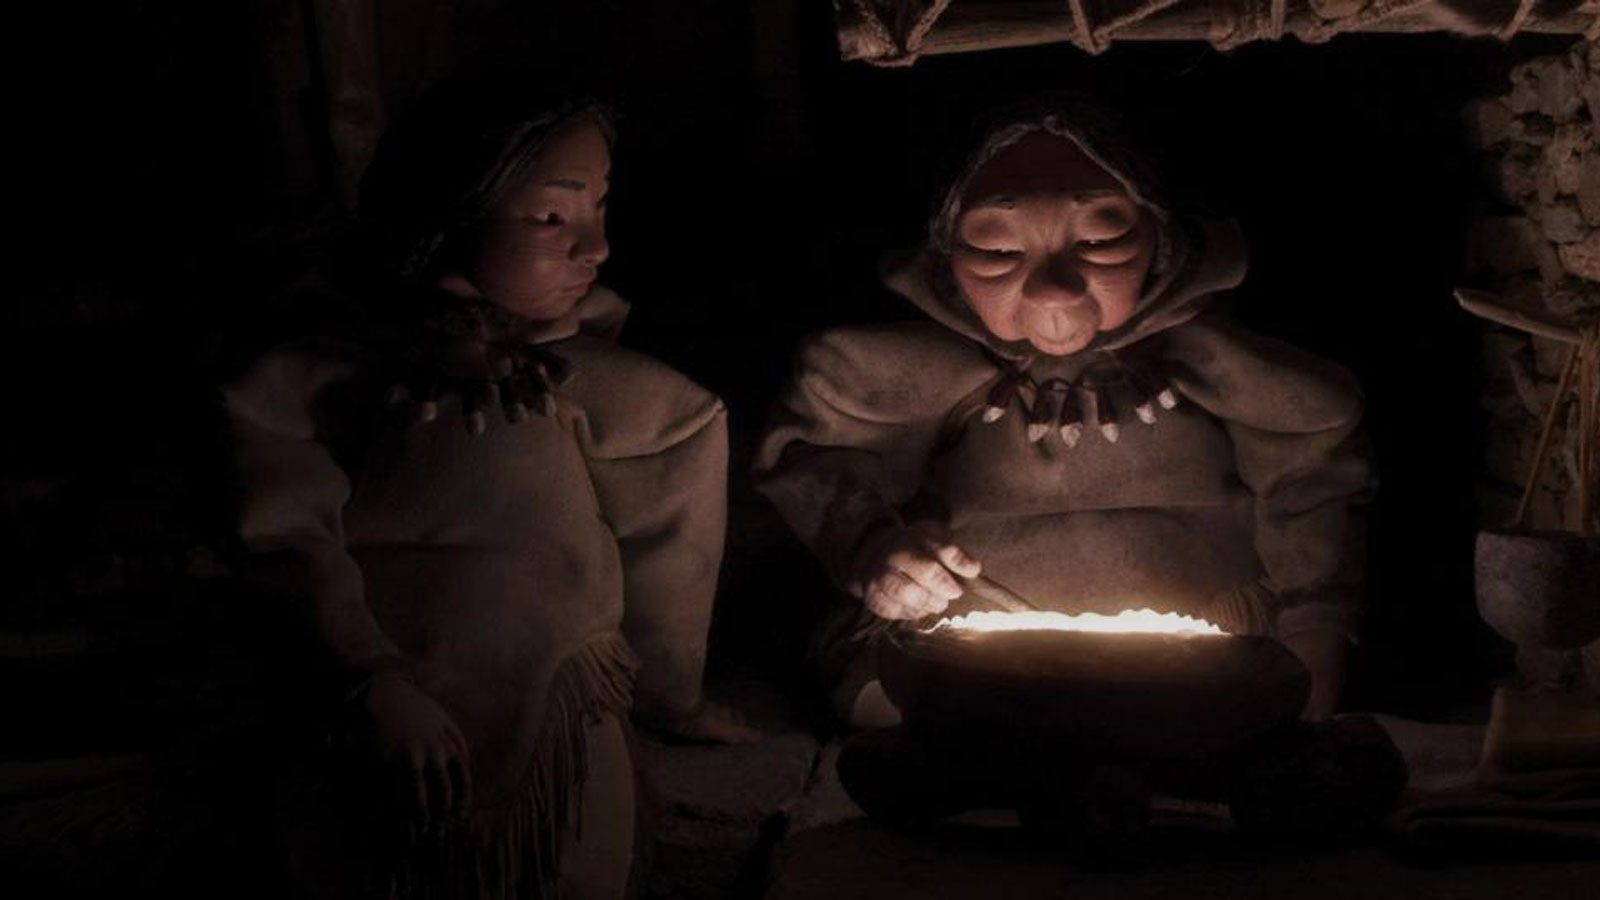 A still from the film The Shaman's Apprentice